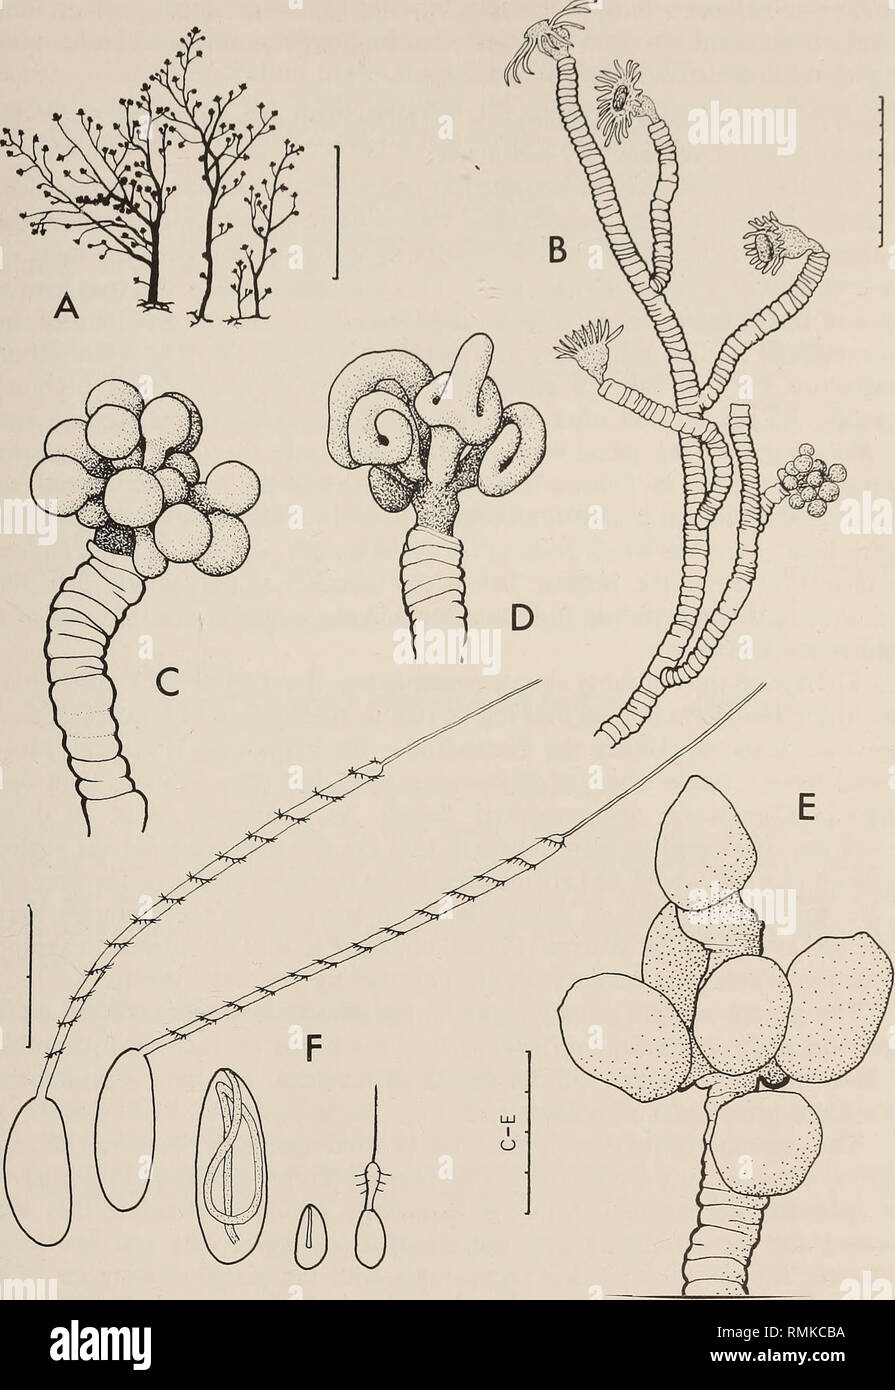 . Annals of the South African Museum = Annale van die Suid-Afrikaanse Museum. Natural history. MONOGRAPH ON THE HYDROIDA OF SOUTHERN AFRICA 89. Fig. 30. Eudendrium ritchiei, sp. nov., all from holotype. A, stems; B, part of stem with hydranms and male blastostyle; C, male blastostyle; D, young female blastostyle; E, old female blastostyle with spadices shed; F, nematocysts, from left to right three macrobasic euryteles (two discharged, one undischarged), and two microbasic euryteles (one undis- charged, one discharged). Scale: A in cm, F in mm/100, the rest in mm/10.. Please note that these im Stock Photo